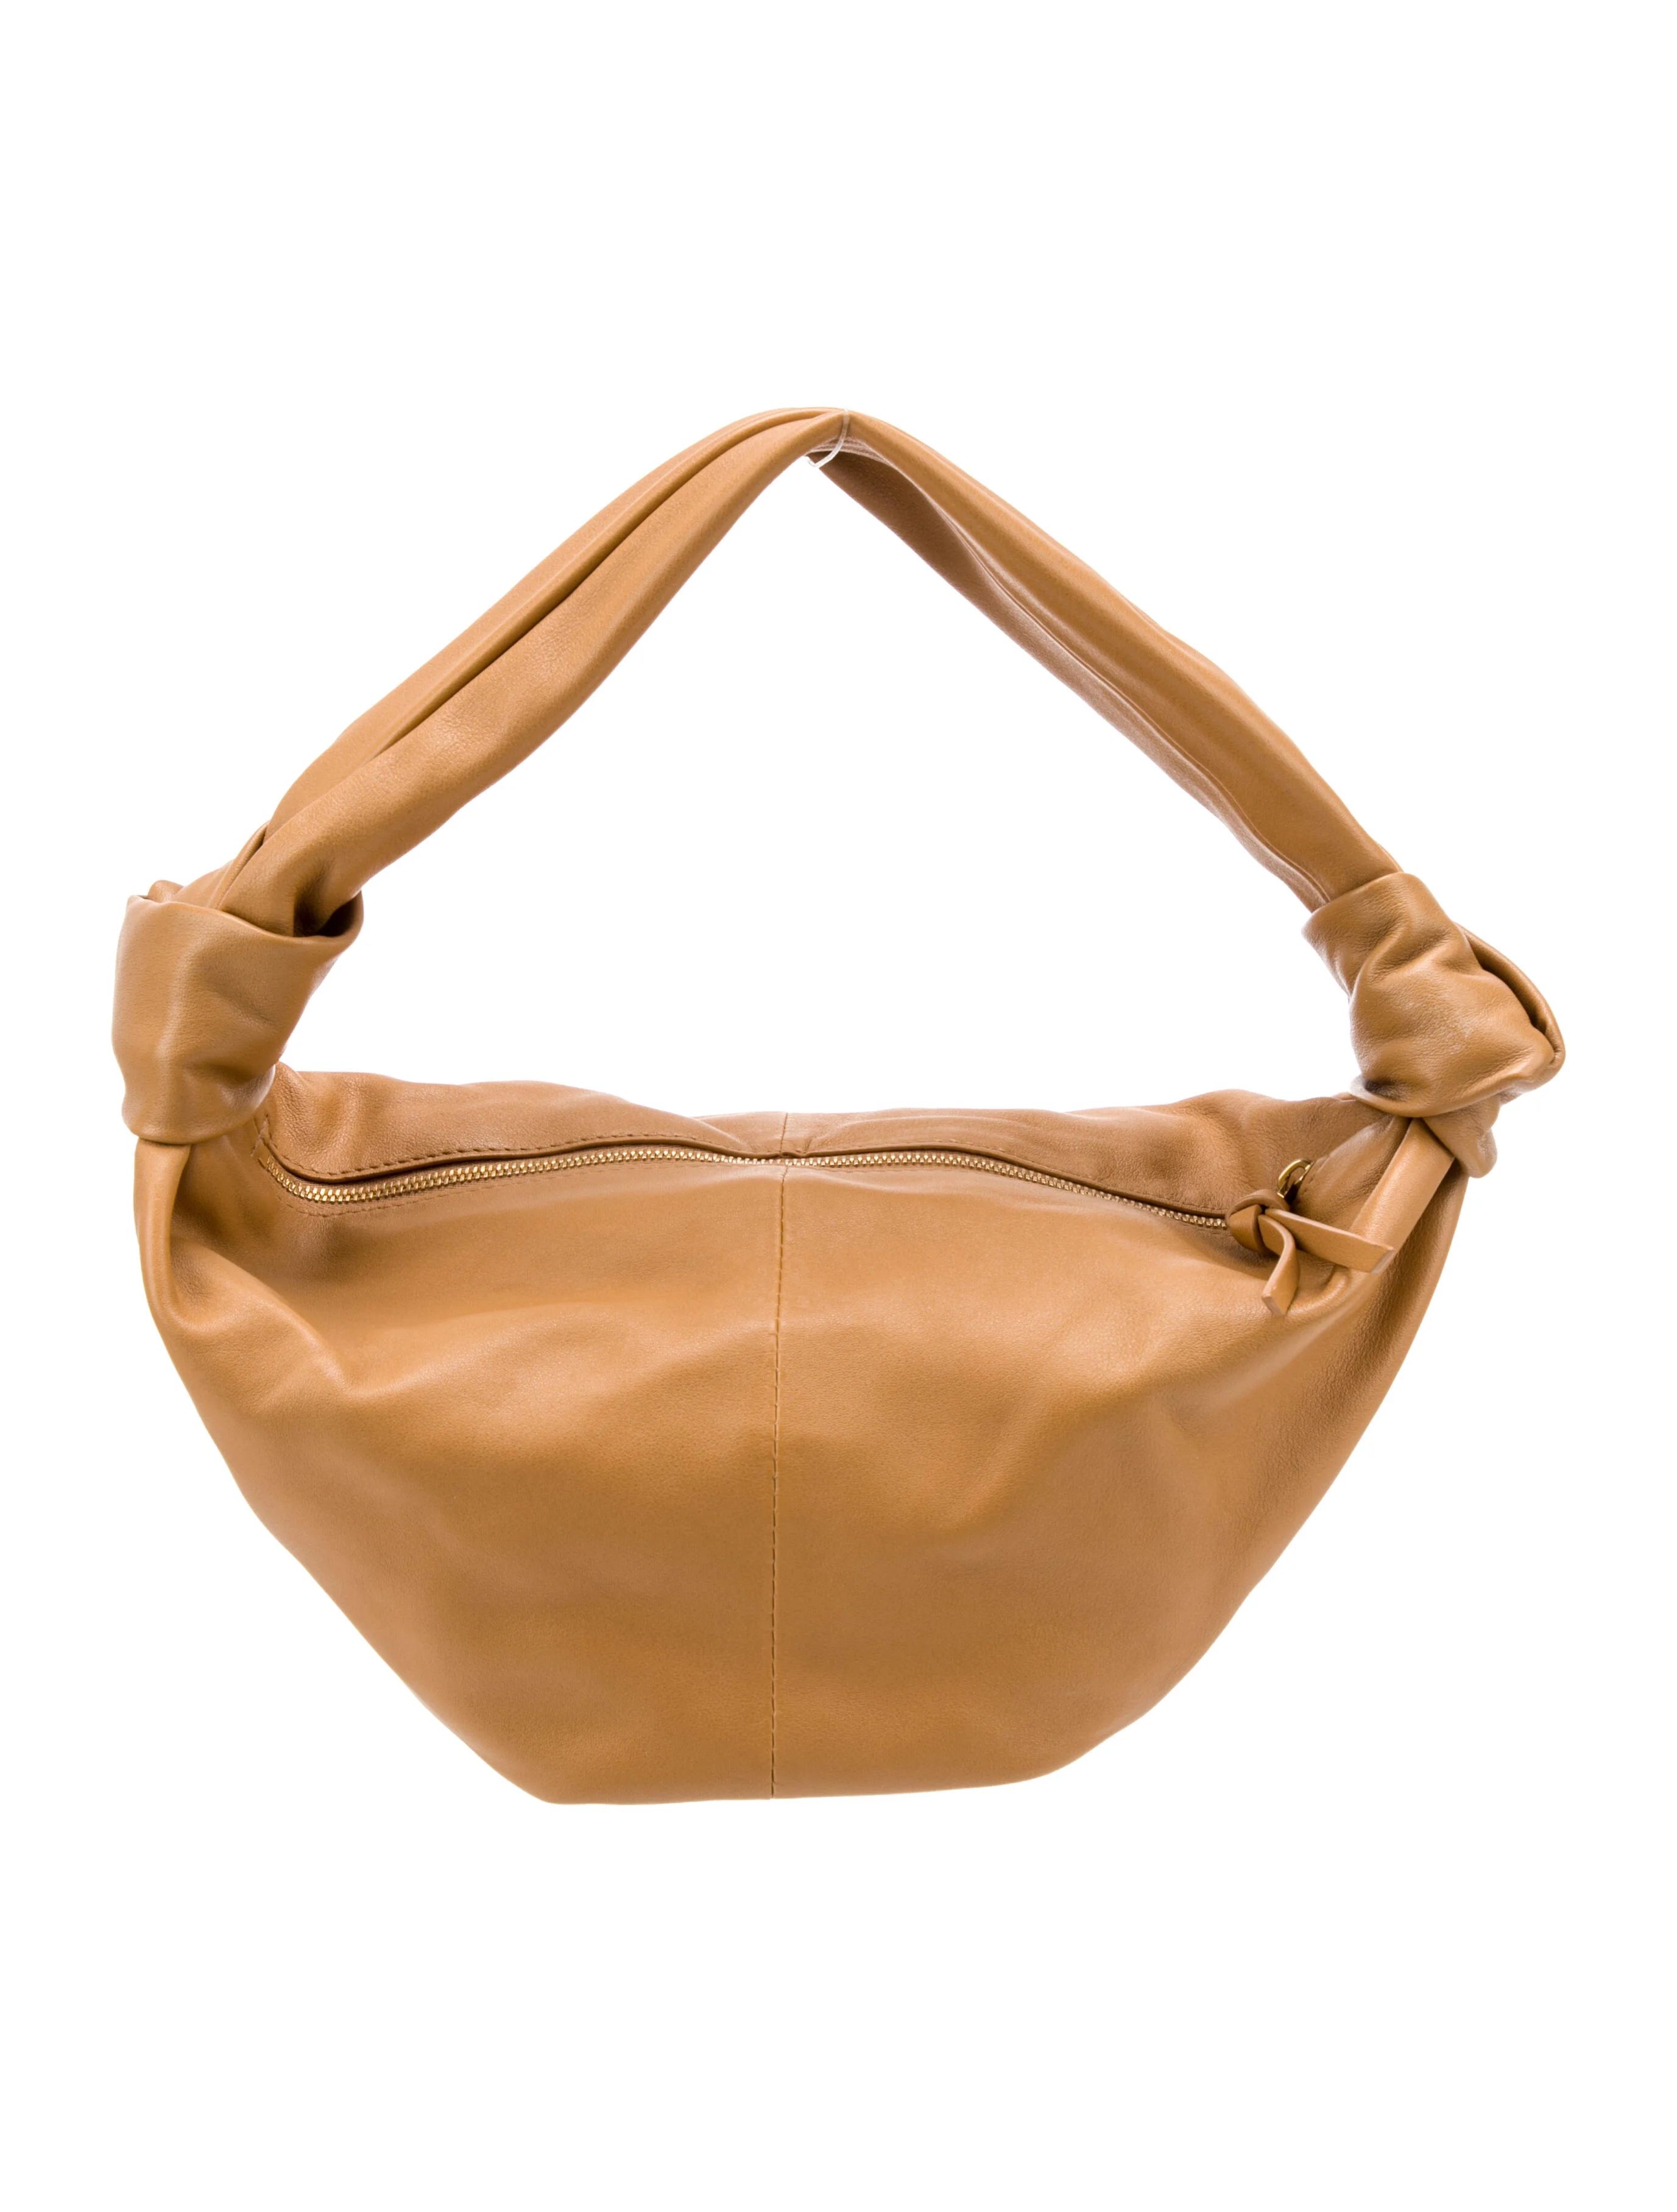 Teen Double Knot Bag | The RealReal